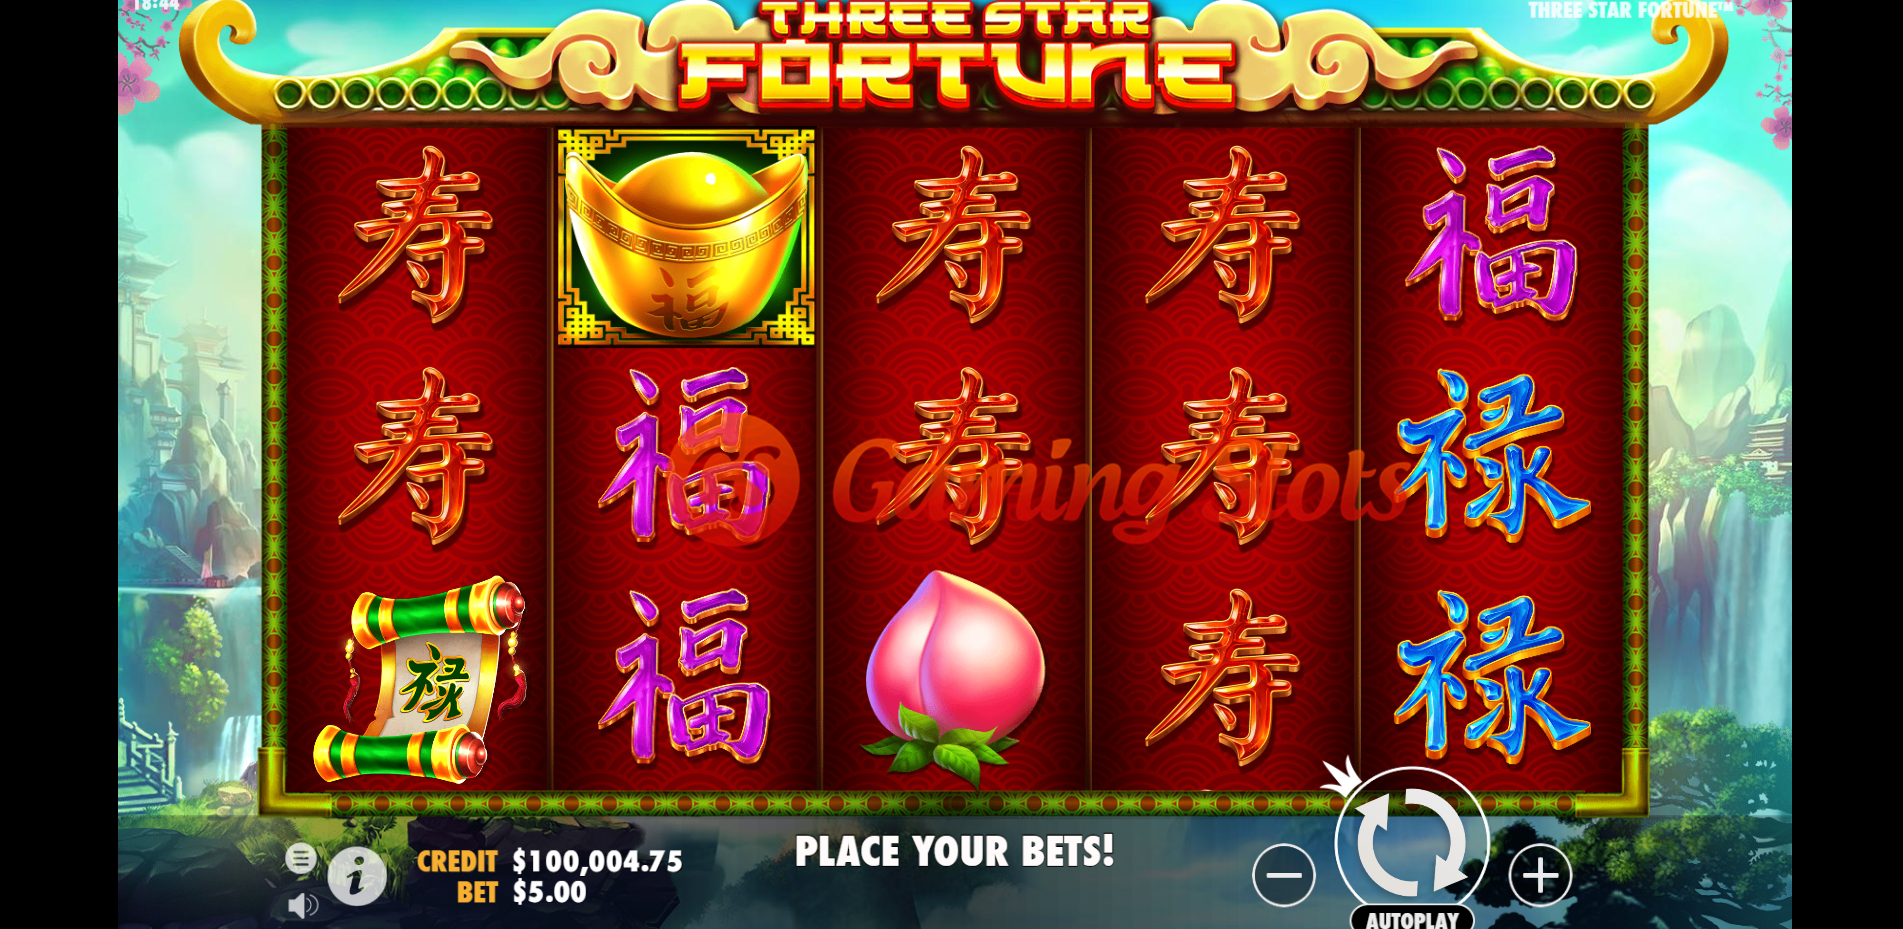 Base Game for Three Star Fortune slot by Pragmatic Play